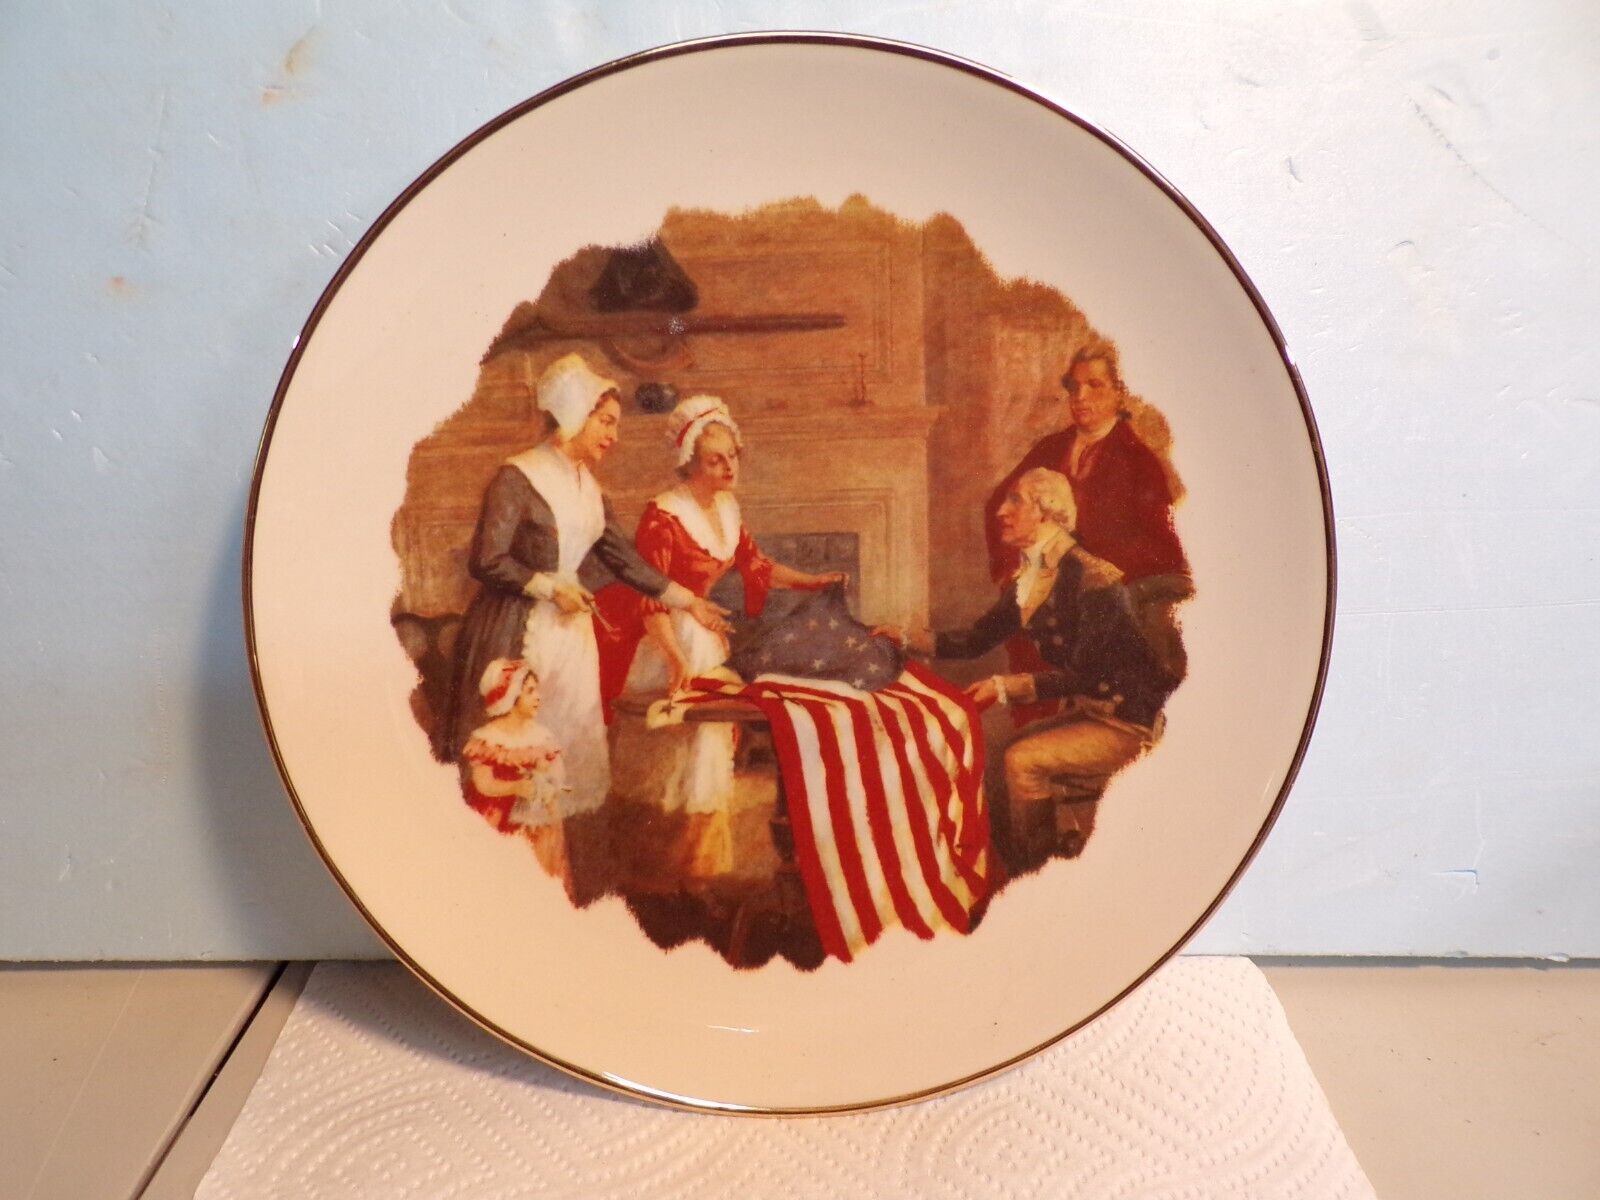 FIRST STARS AND STRIPES 1777 COLLECTORS PLATE, #2919 OF 9900, JOHN DUNSMORE